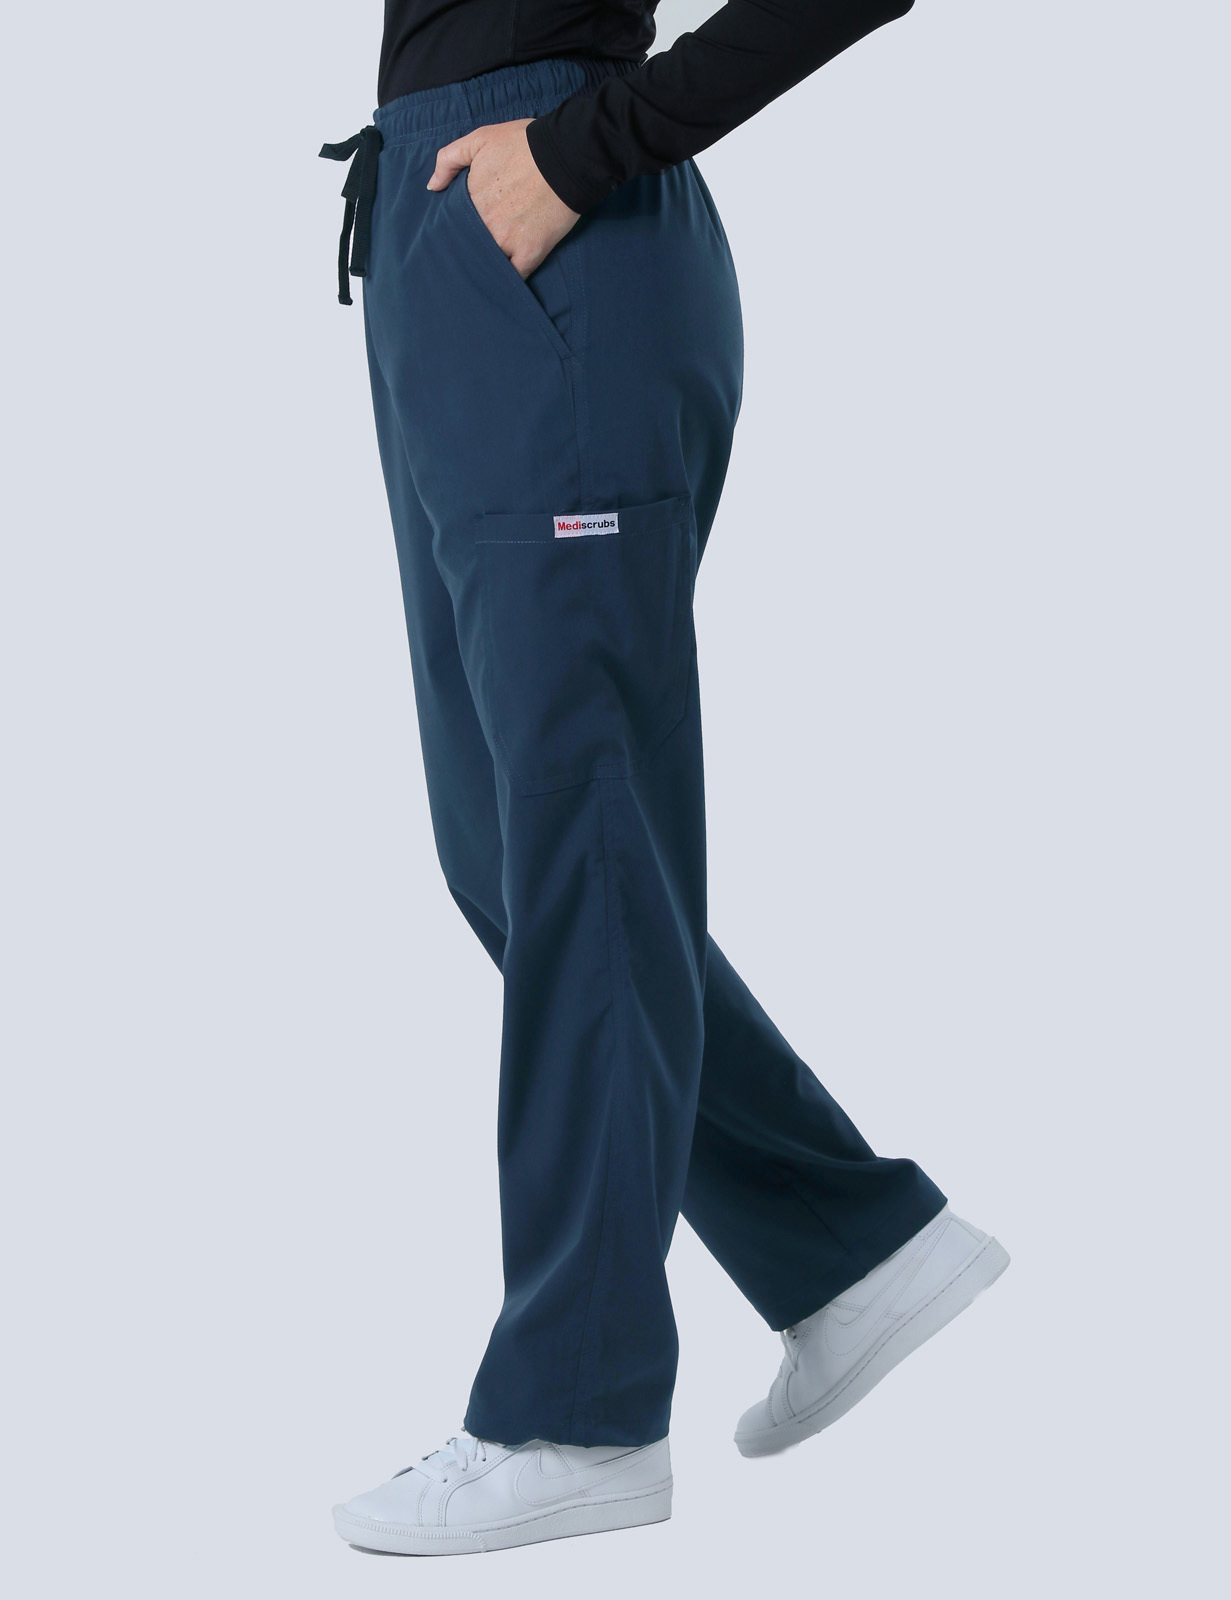 Royal Melbourne Hospital - ICU (Women's Fit Solid Scrub Top and Cargo Pants in Navy incl Logos)